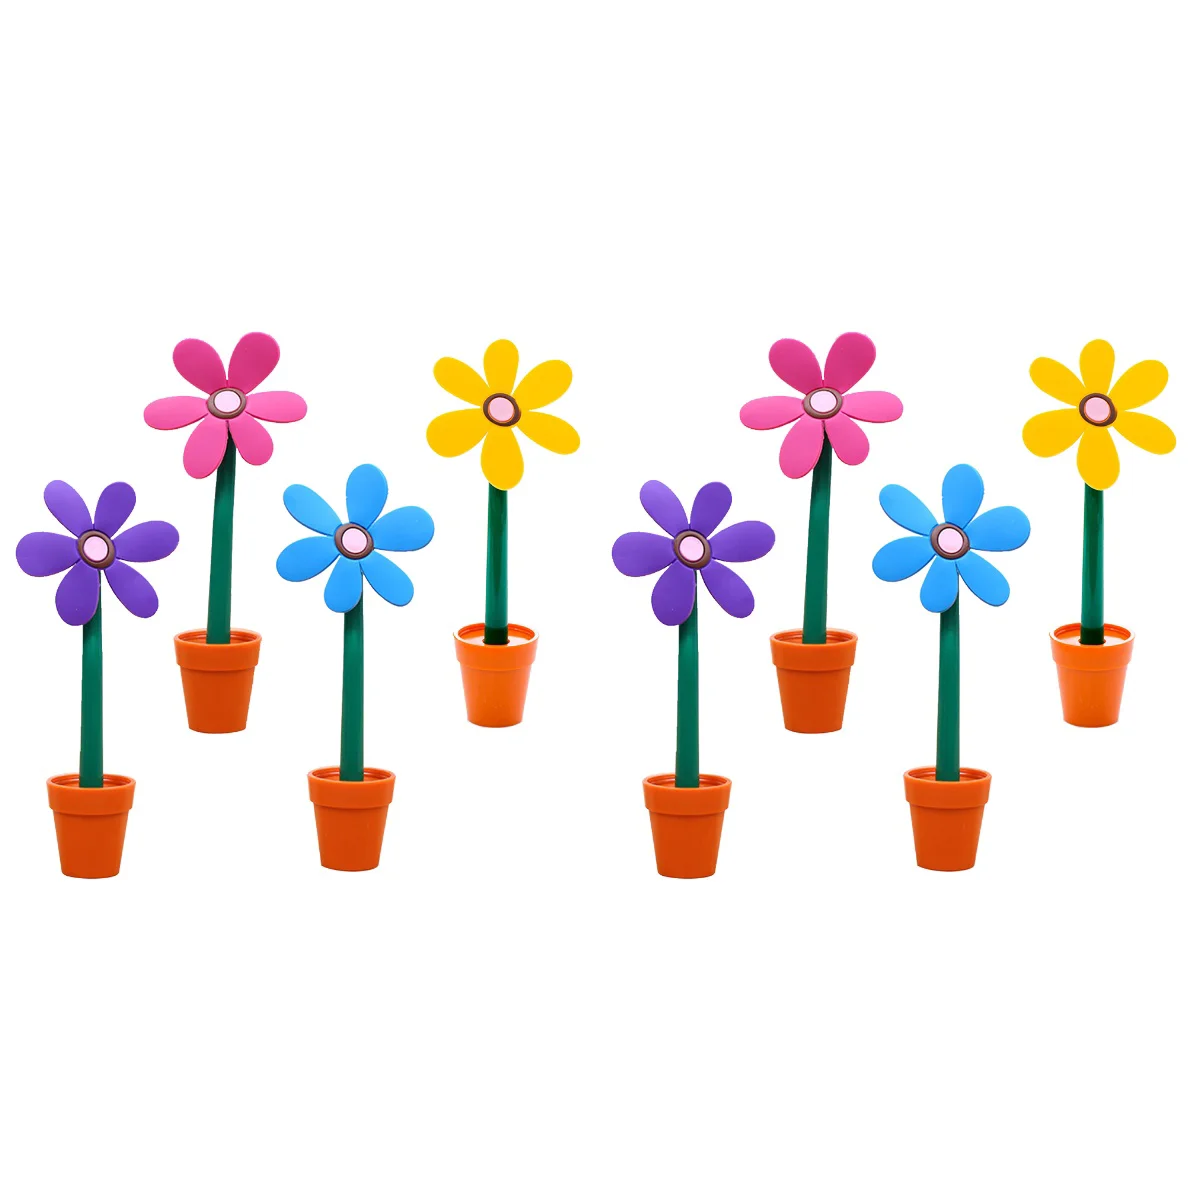 

8 pcs Sunflower Ball-point Pen Adorable Flowerpot Ballpoint Pens Stationery for Home School Office (Purple, Yellow, Rosy, Blue,